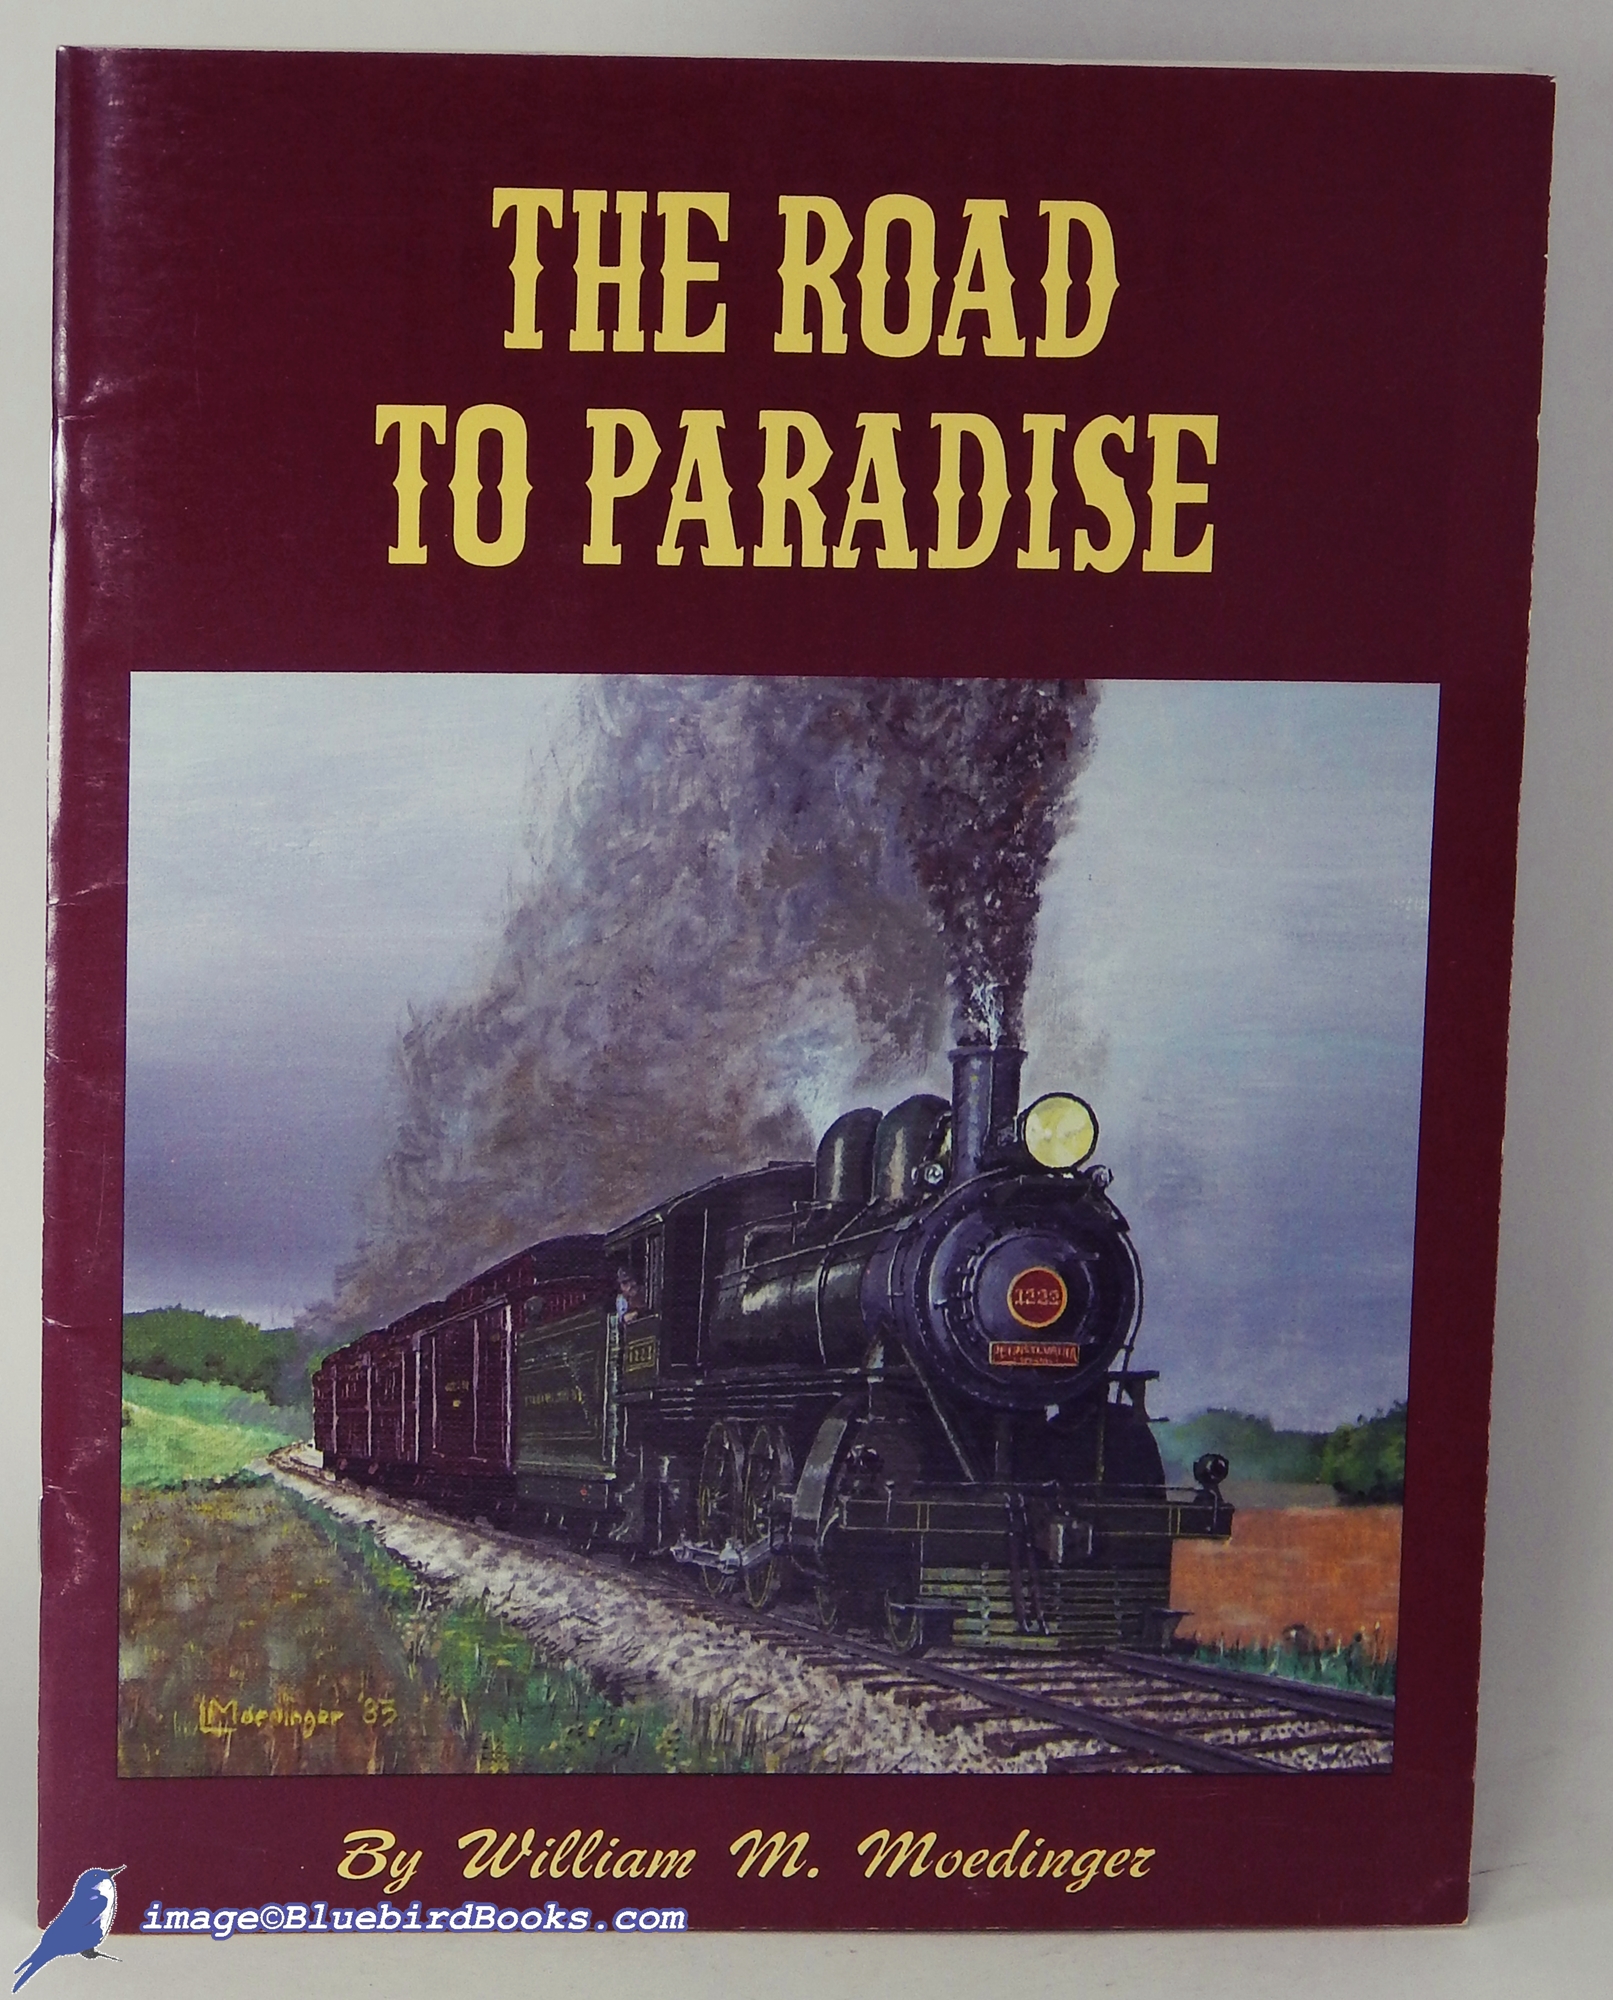 MOEDINGER, WILLIAM M. - The Road to Paradise: The Story of the Rebirth of the Strasburg Rail Road